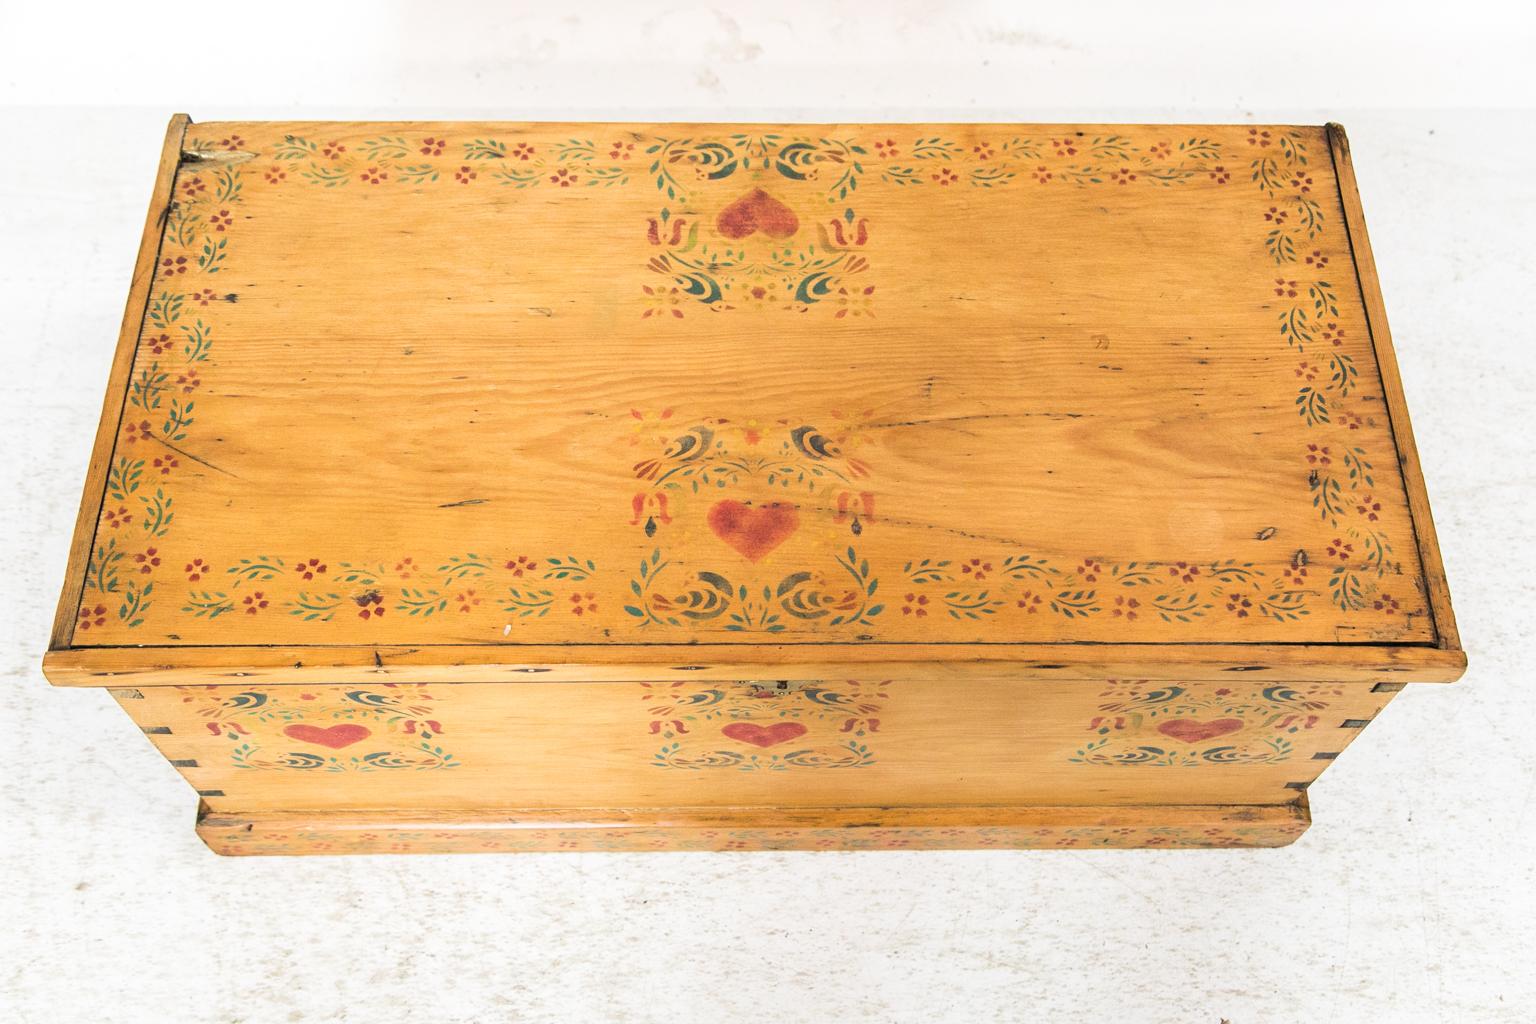 This blanket chest has exposed dovetail construction and is painted on the front and top with hearts and interlaced flowers and vines.